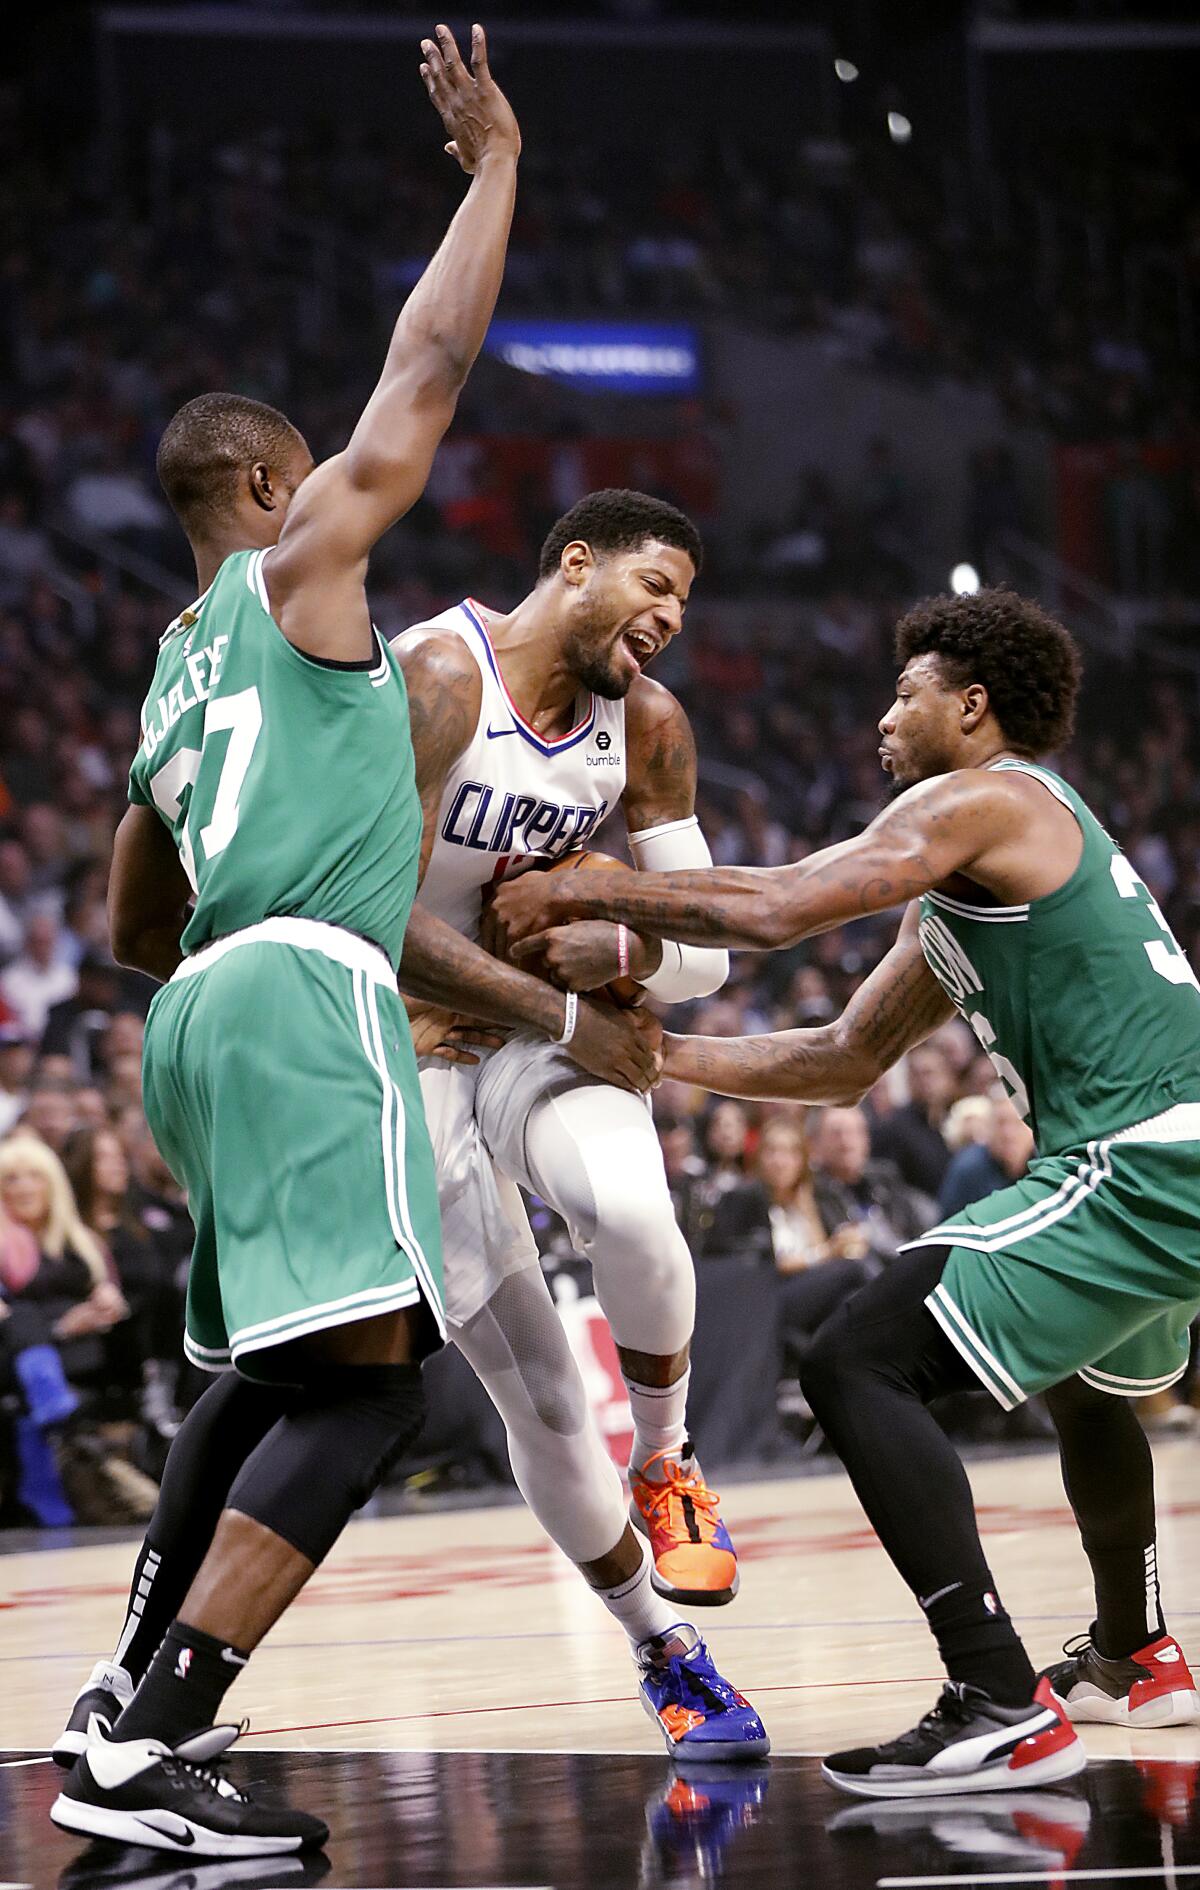 Clippers forward Paul George, center, gets fouled on a drive between Boston defenders Semi Ojeleye and Marcus Smart during the second quarter of their game Nov. 20, 2019, at Staples Center.